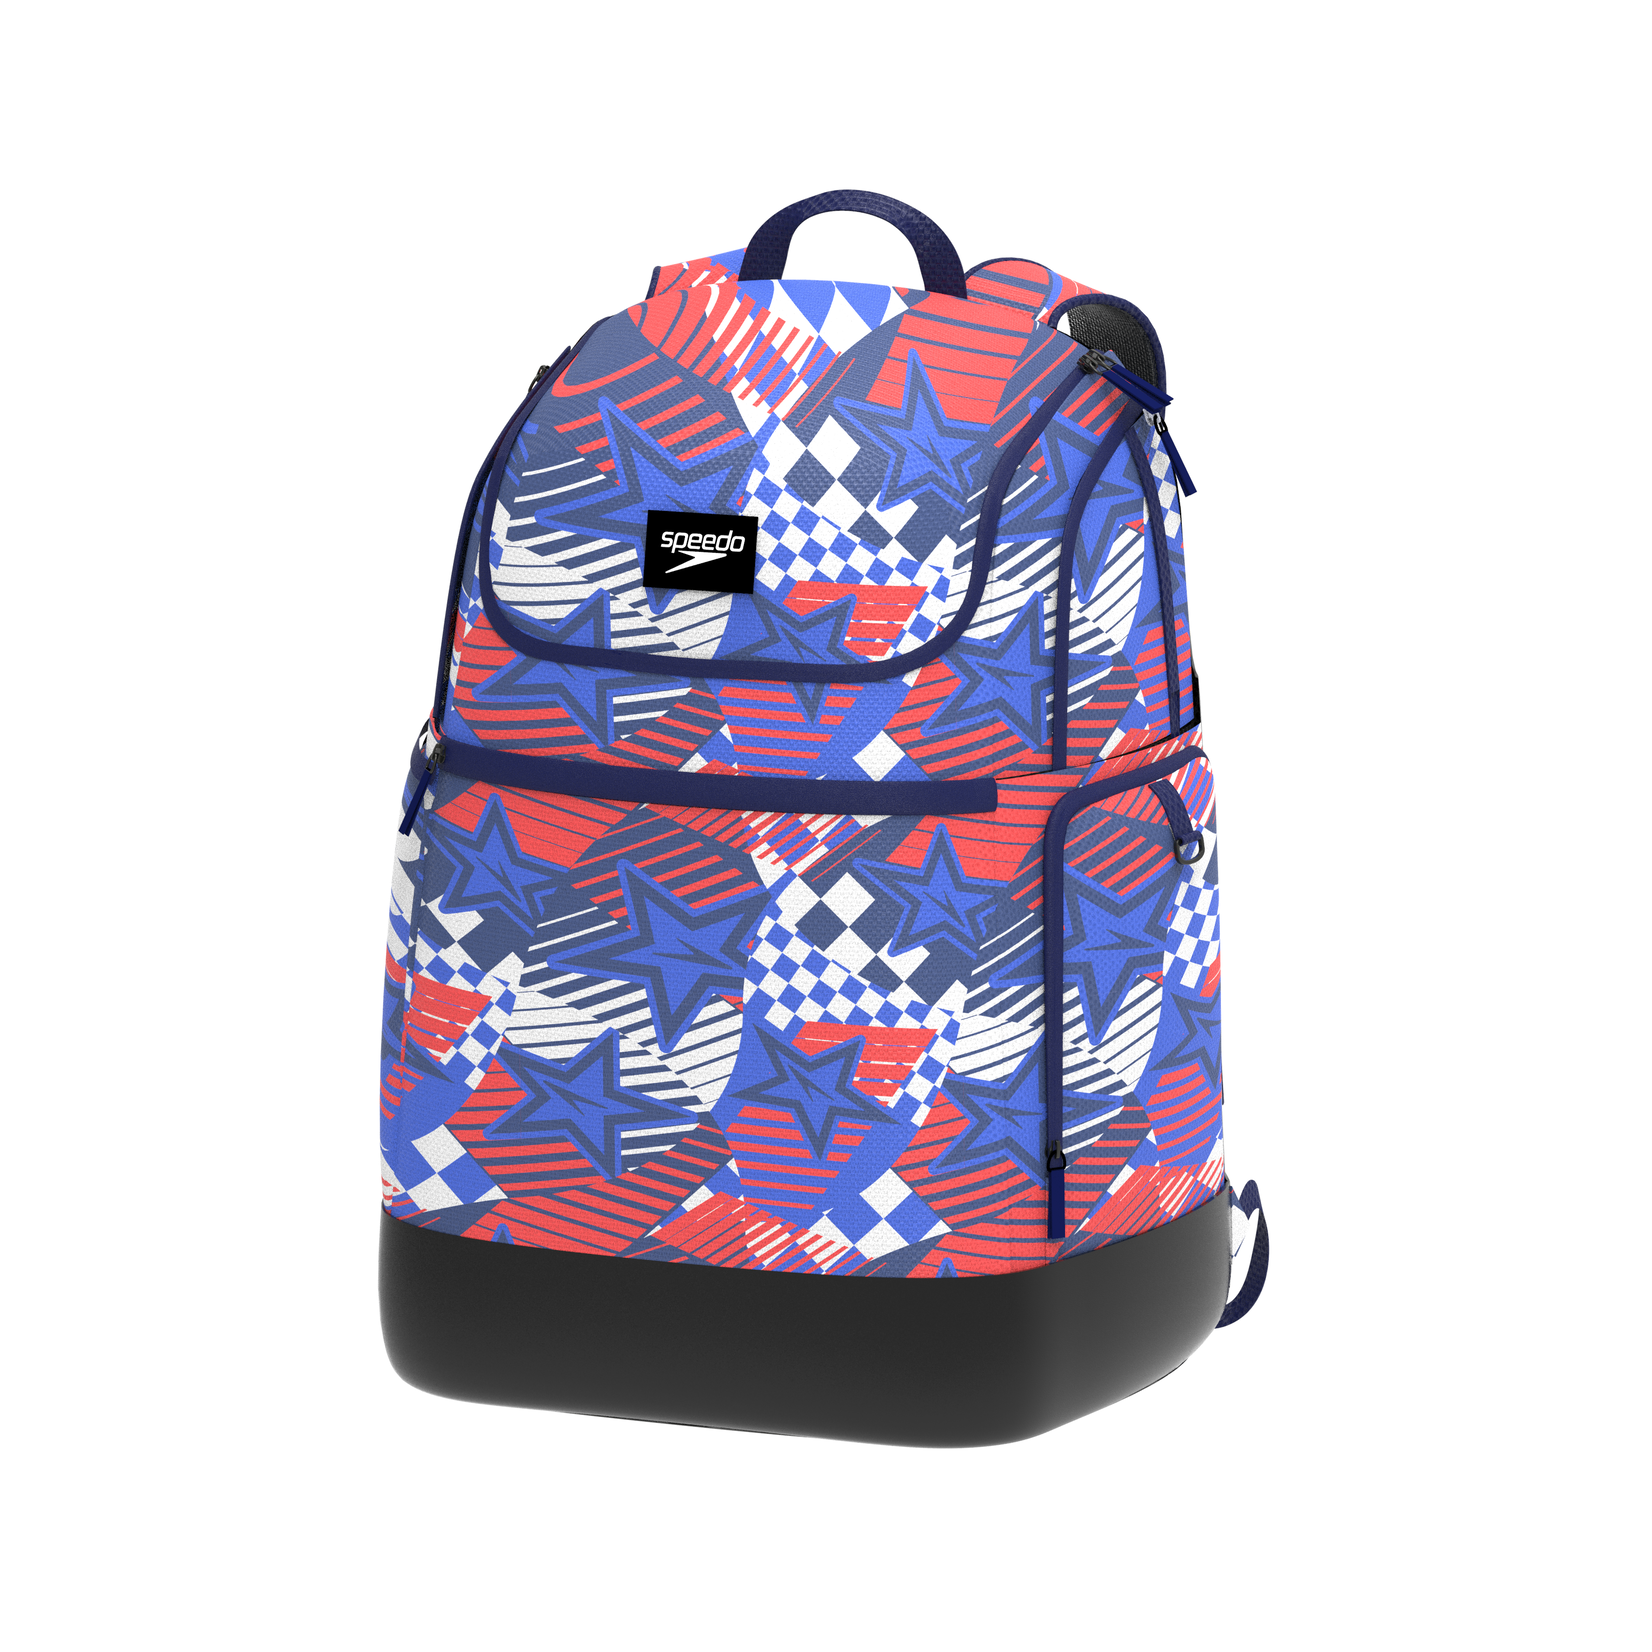 Olympic Rally Time Teamster 35L